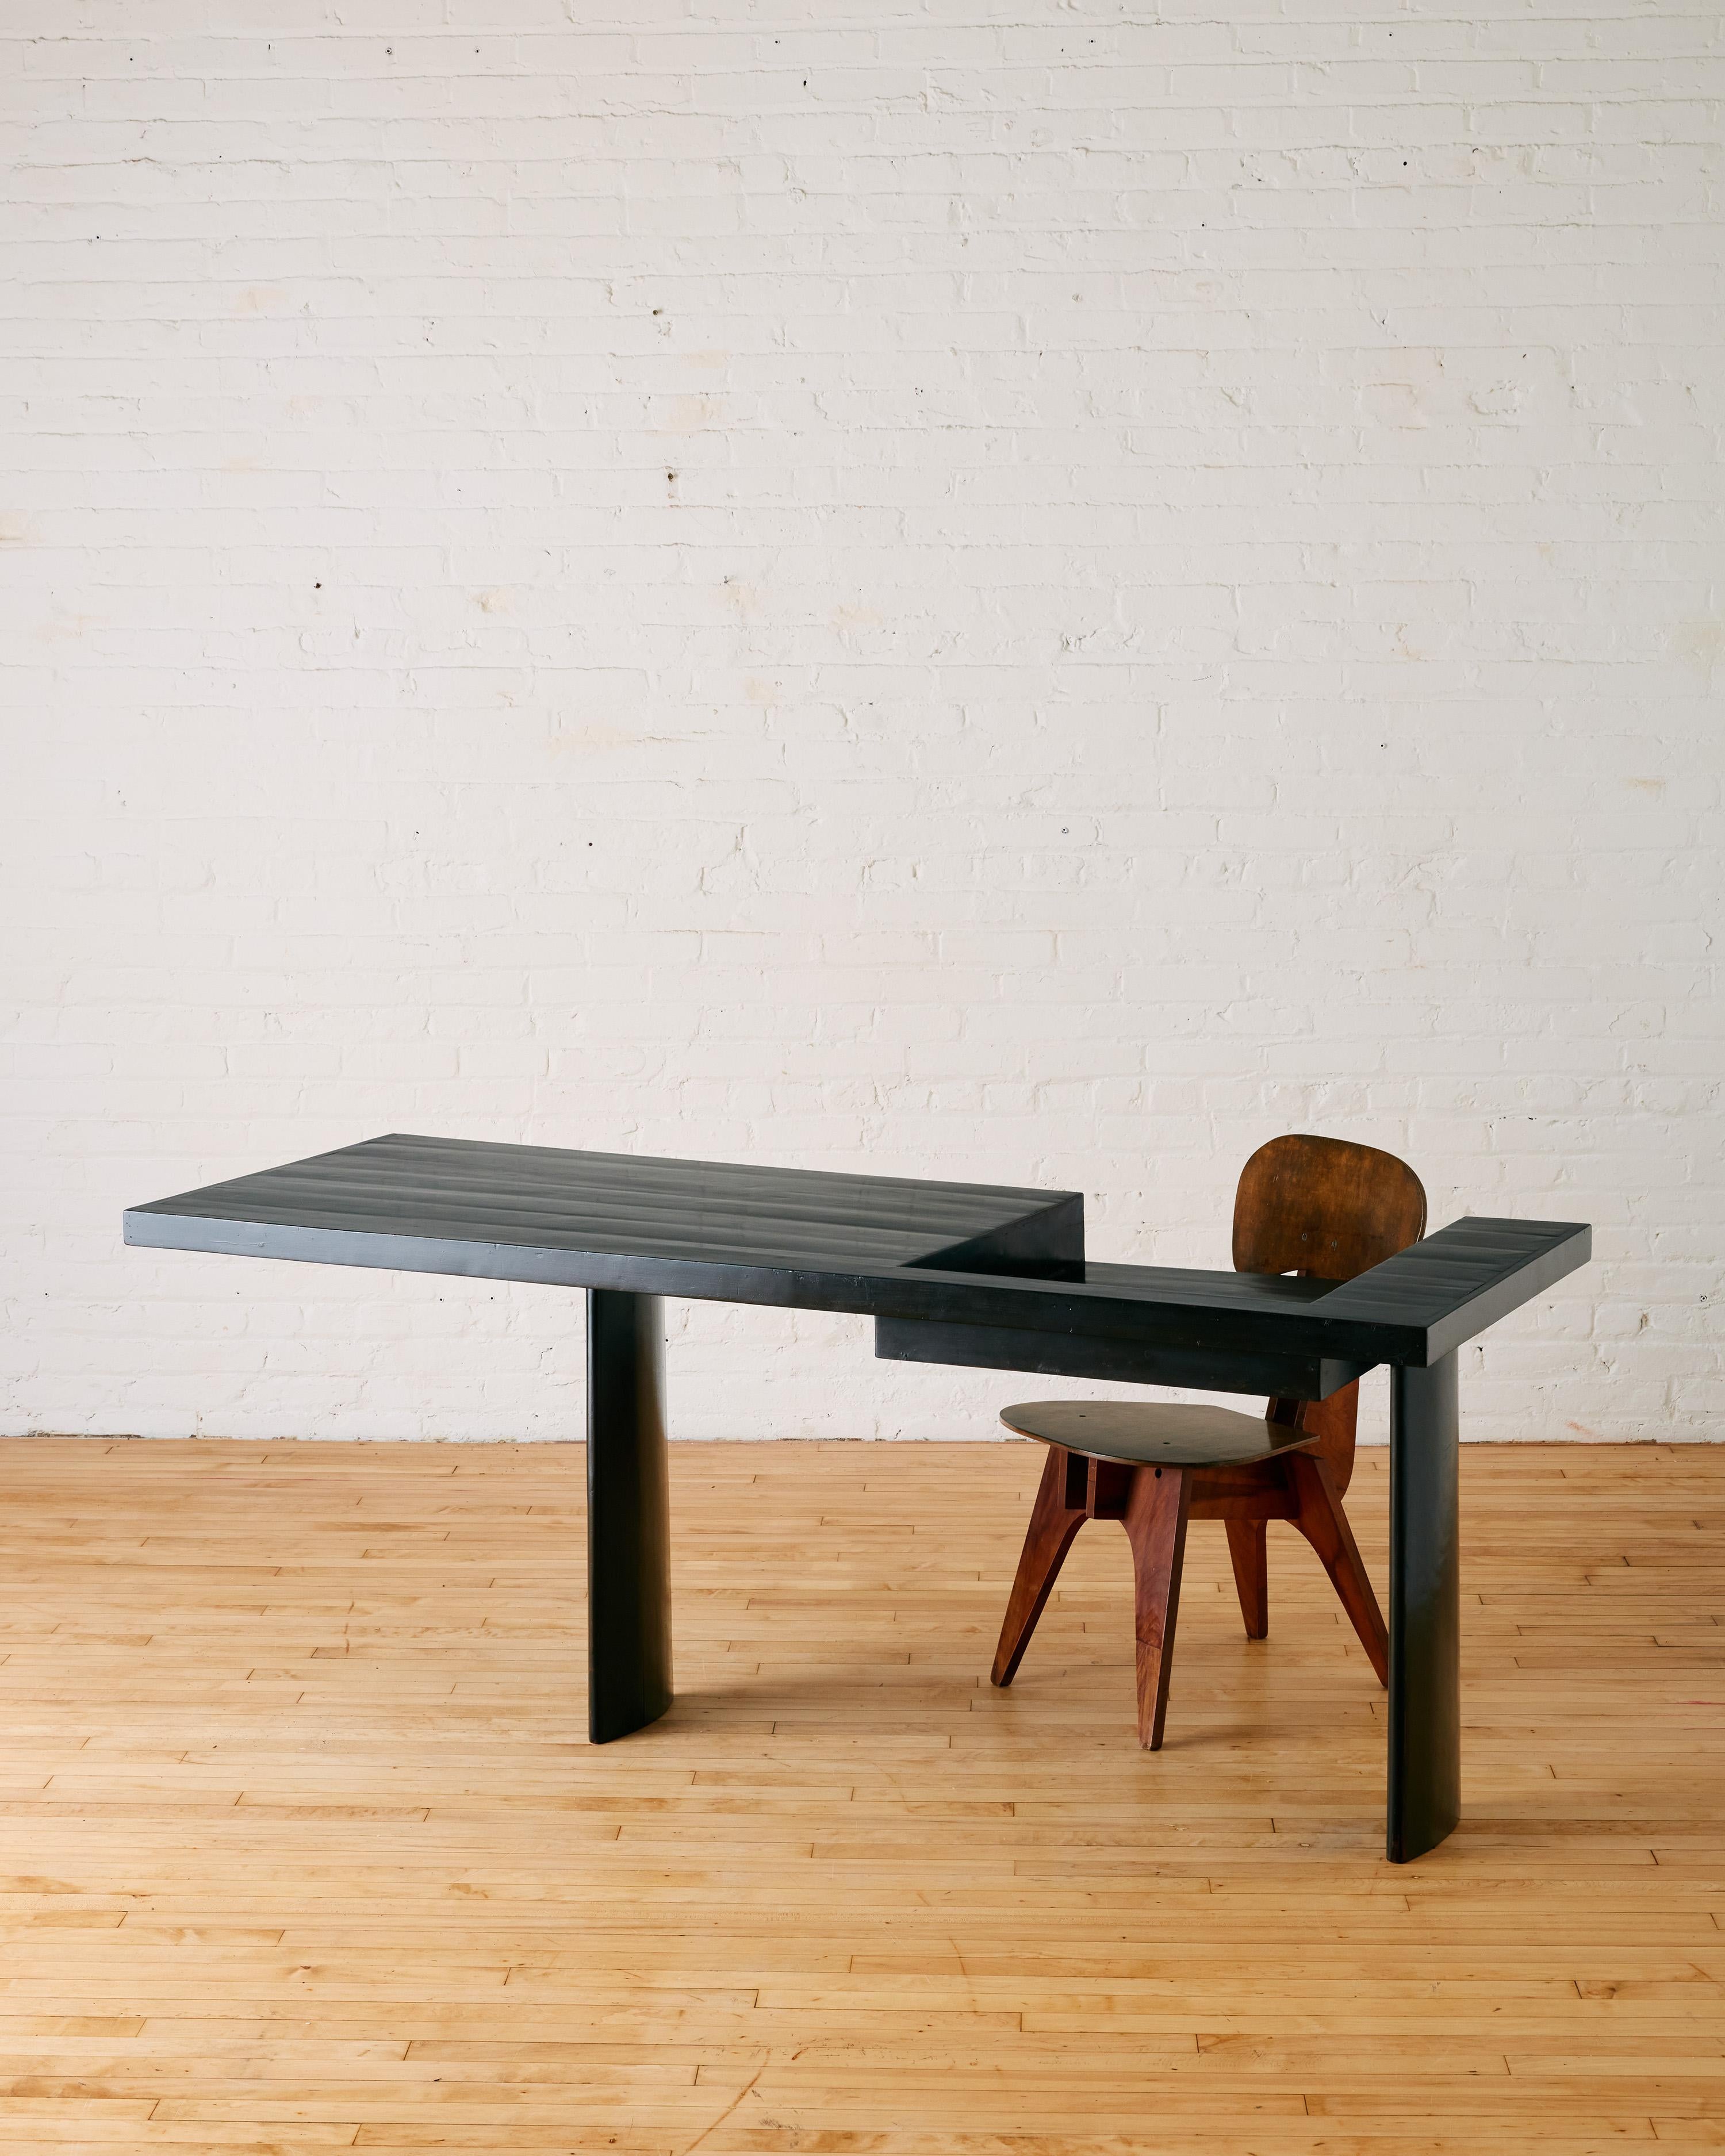 Rare Ammedabad Console/Desk by Le Corbusier. This item was originally designed by Indian Architect, B.V Doshi under the supervision of Le Corbusier for Mills Owners Association building in Ahmedabad.

This console/desk was likewise crafted by the